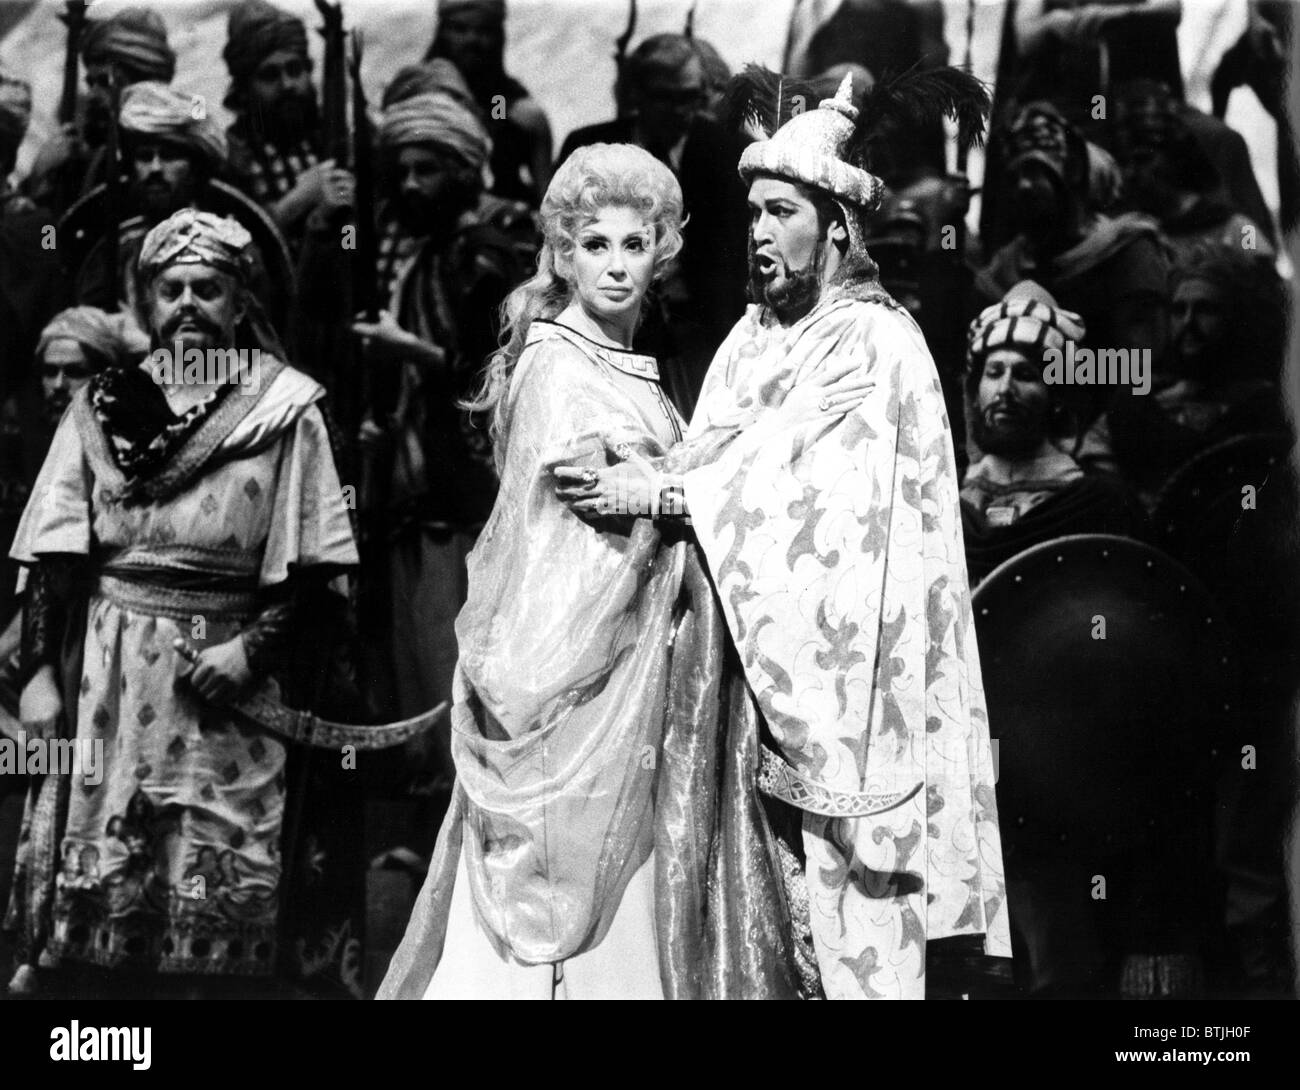 Beverly Sills, Justino Diaz performing Rossini's THE SIEGE OF CORINTH, Metropolitan Opera, New York, NY, 1975 Stock Photo